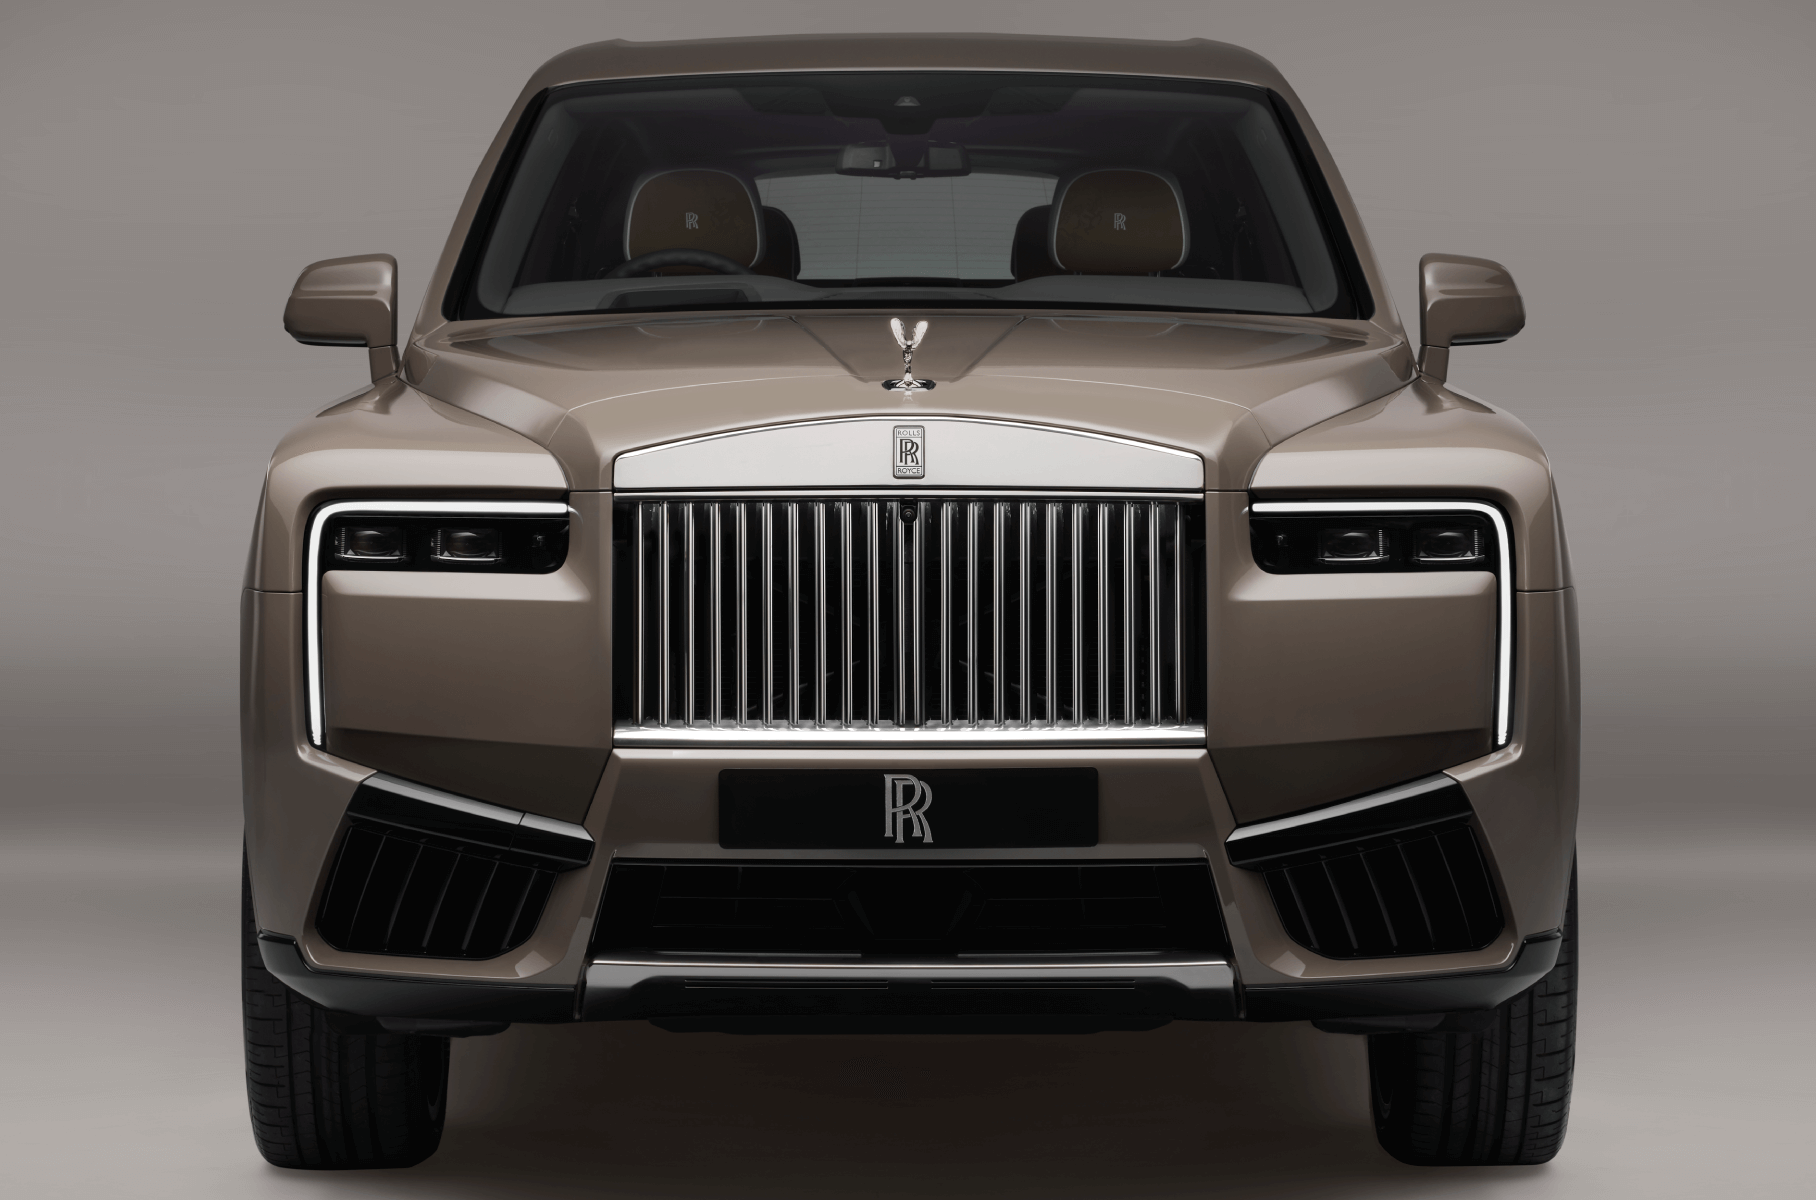 Rolls-Royce introduced the updated Cullinan crossover